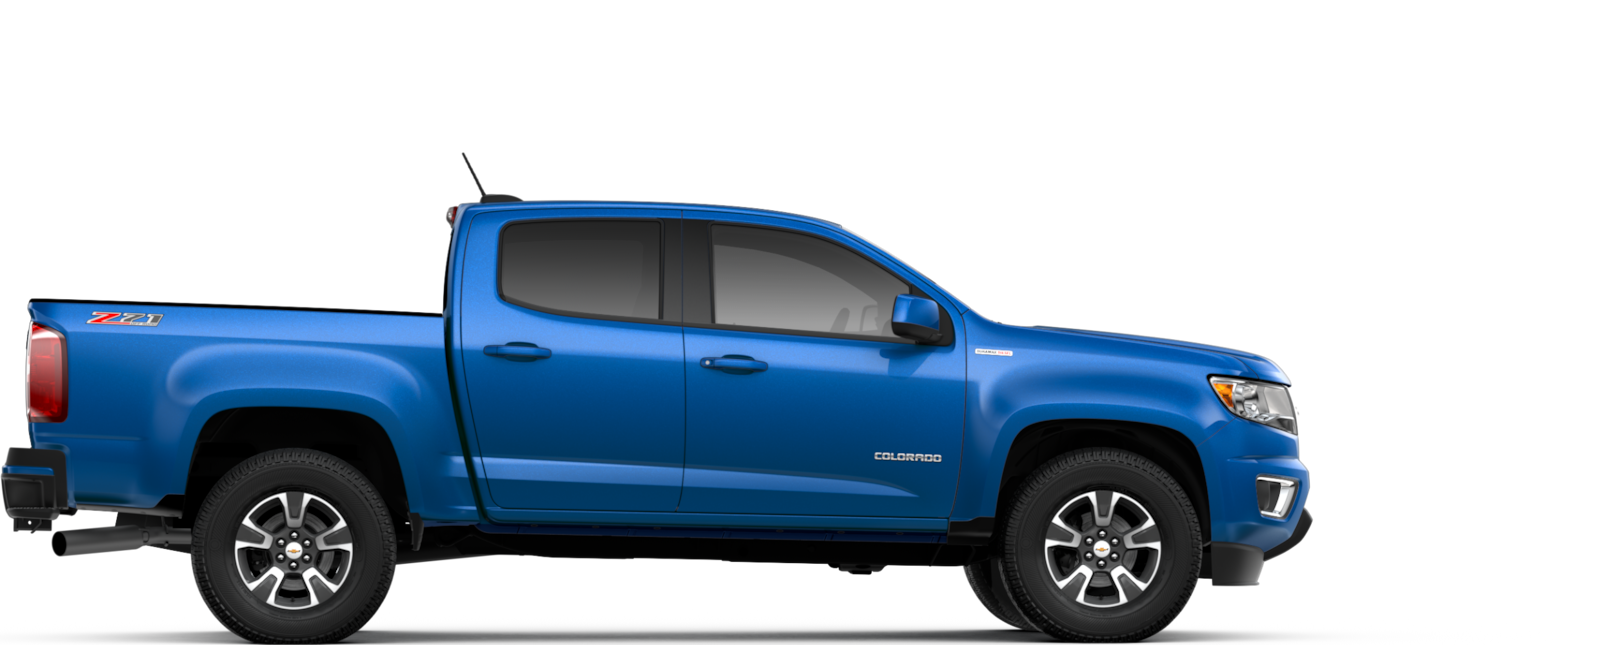 Pickup Truck PNG HD Free File Download